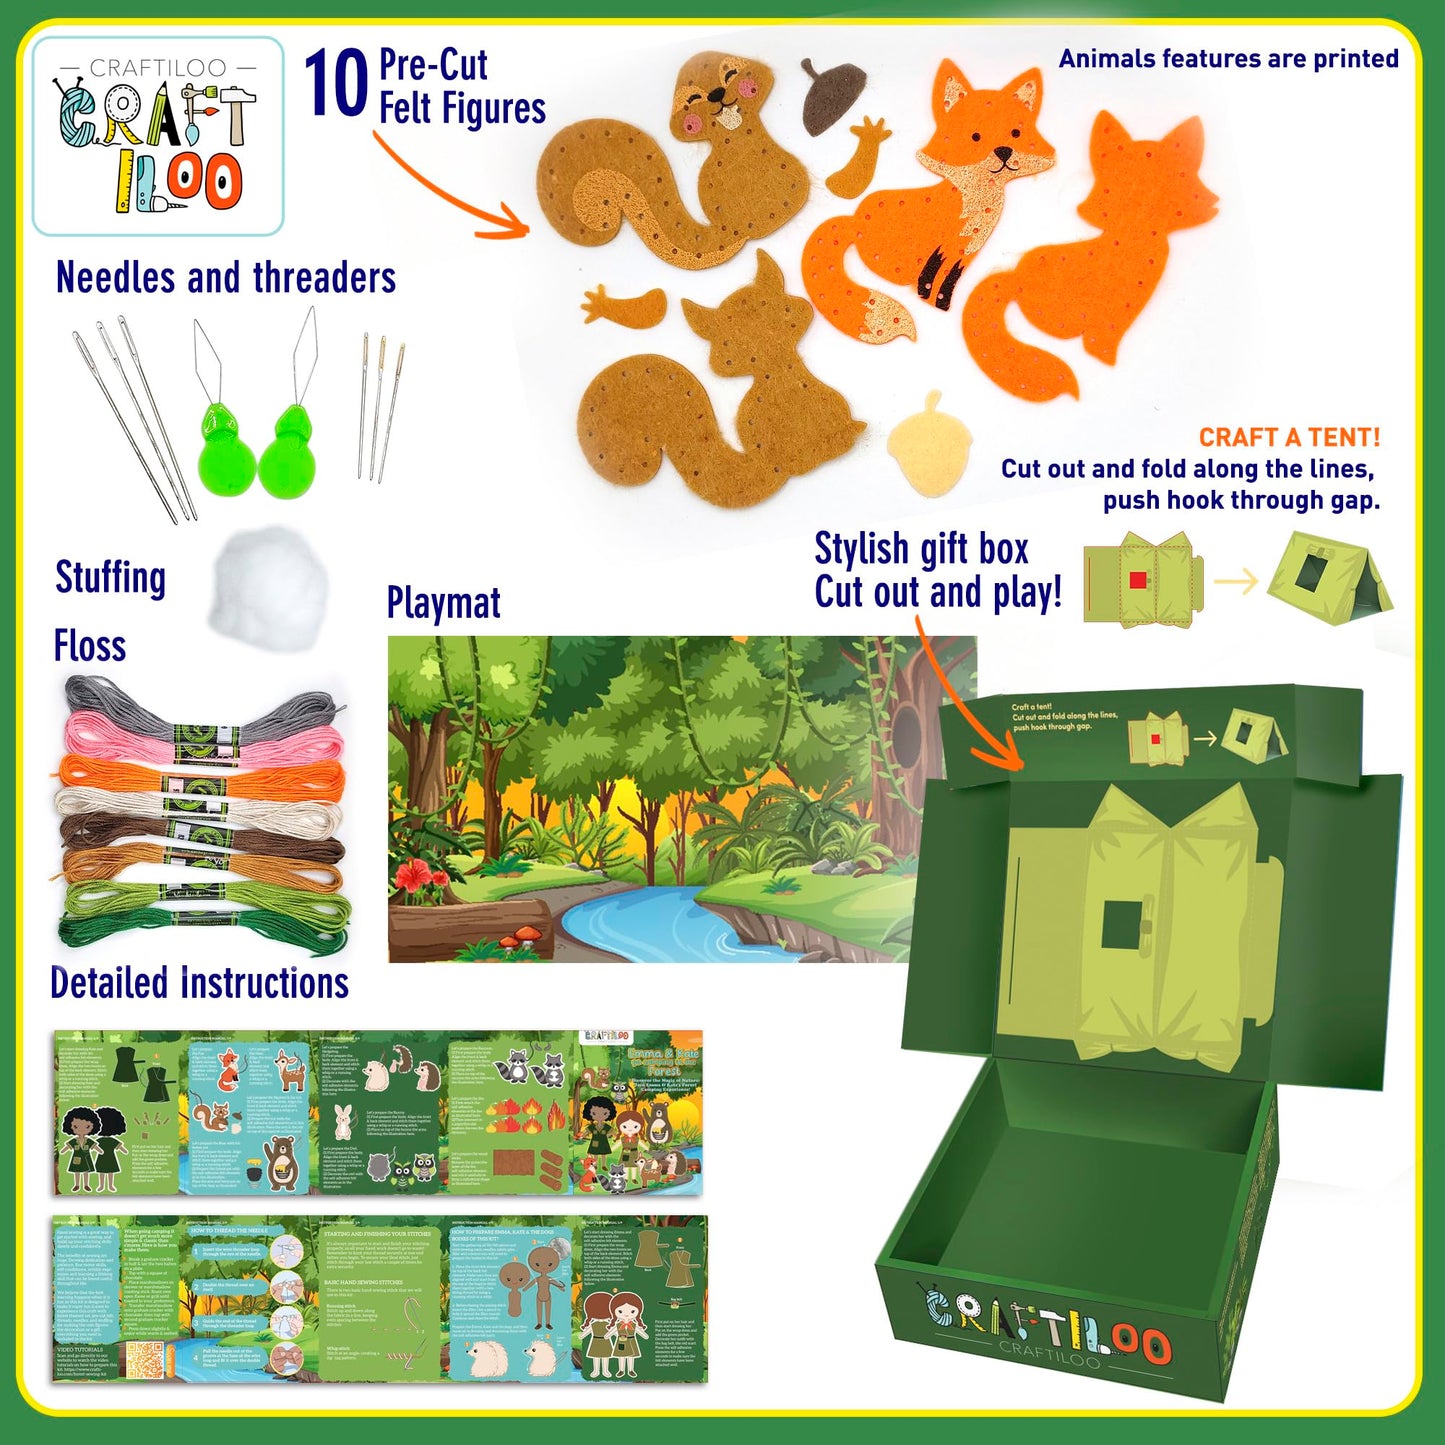 CRAFTILOO Woodland Sewing Kit for Kids, Fun and Educational Fairytale Craft Set for Boys and Girls Age 7-12, Sew Your Own Felt Forest Animal Craft